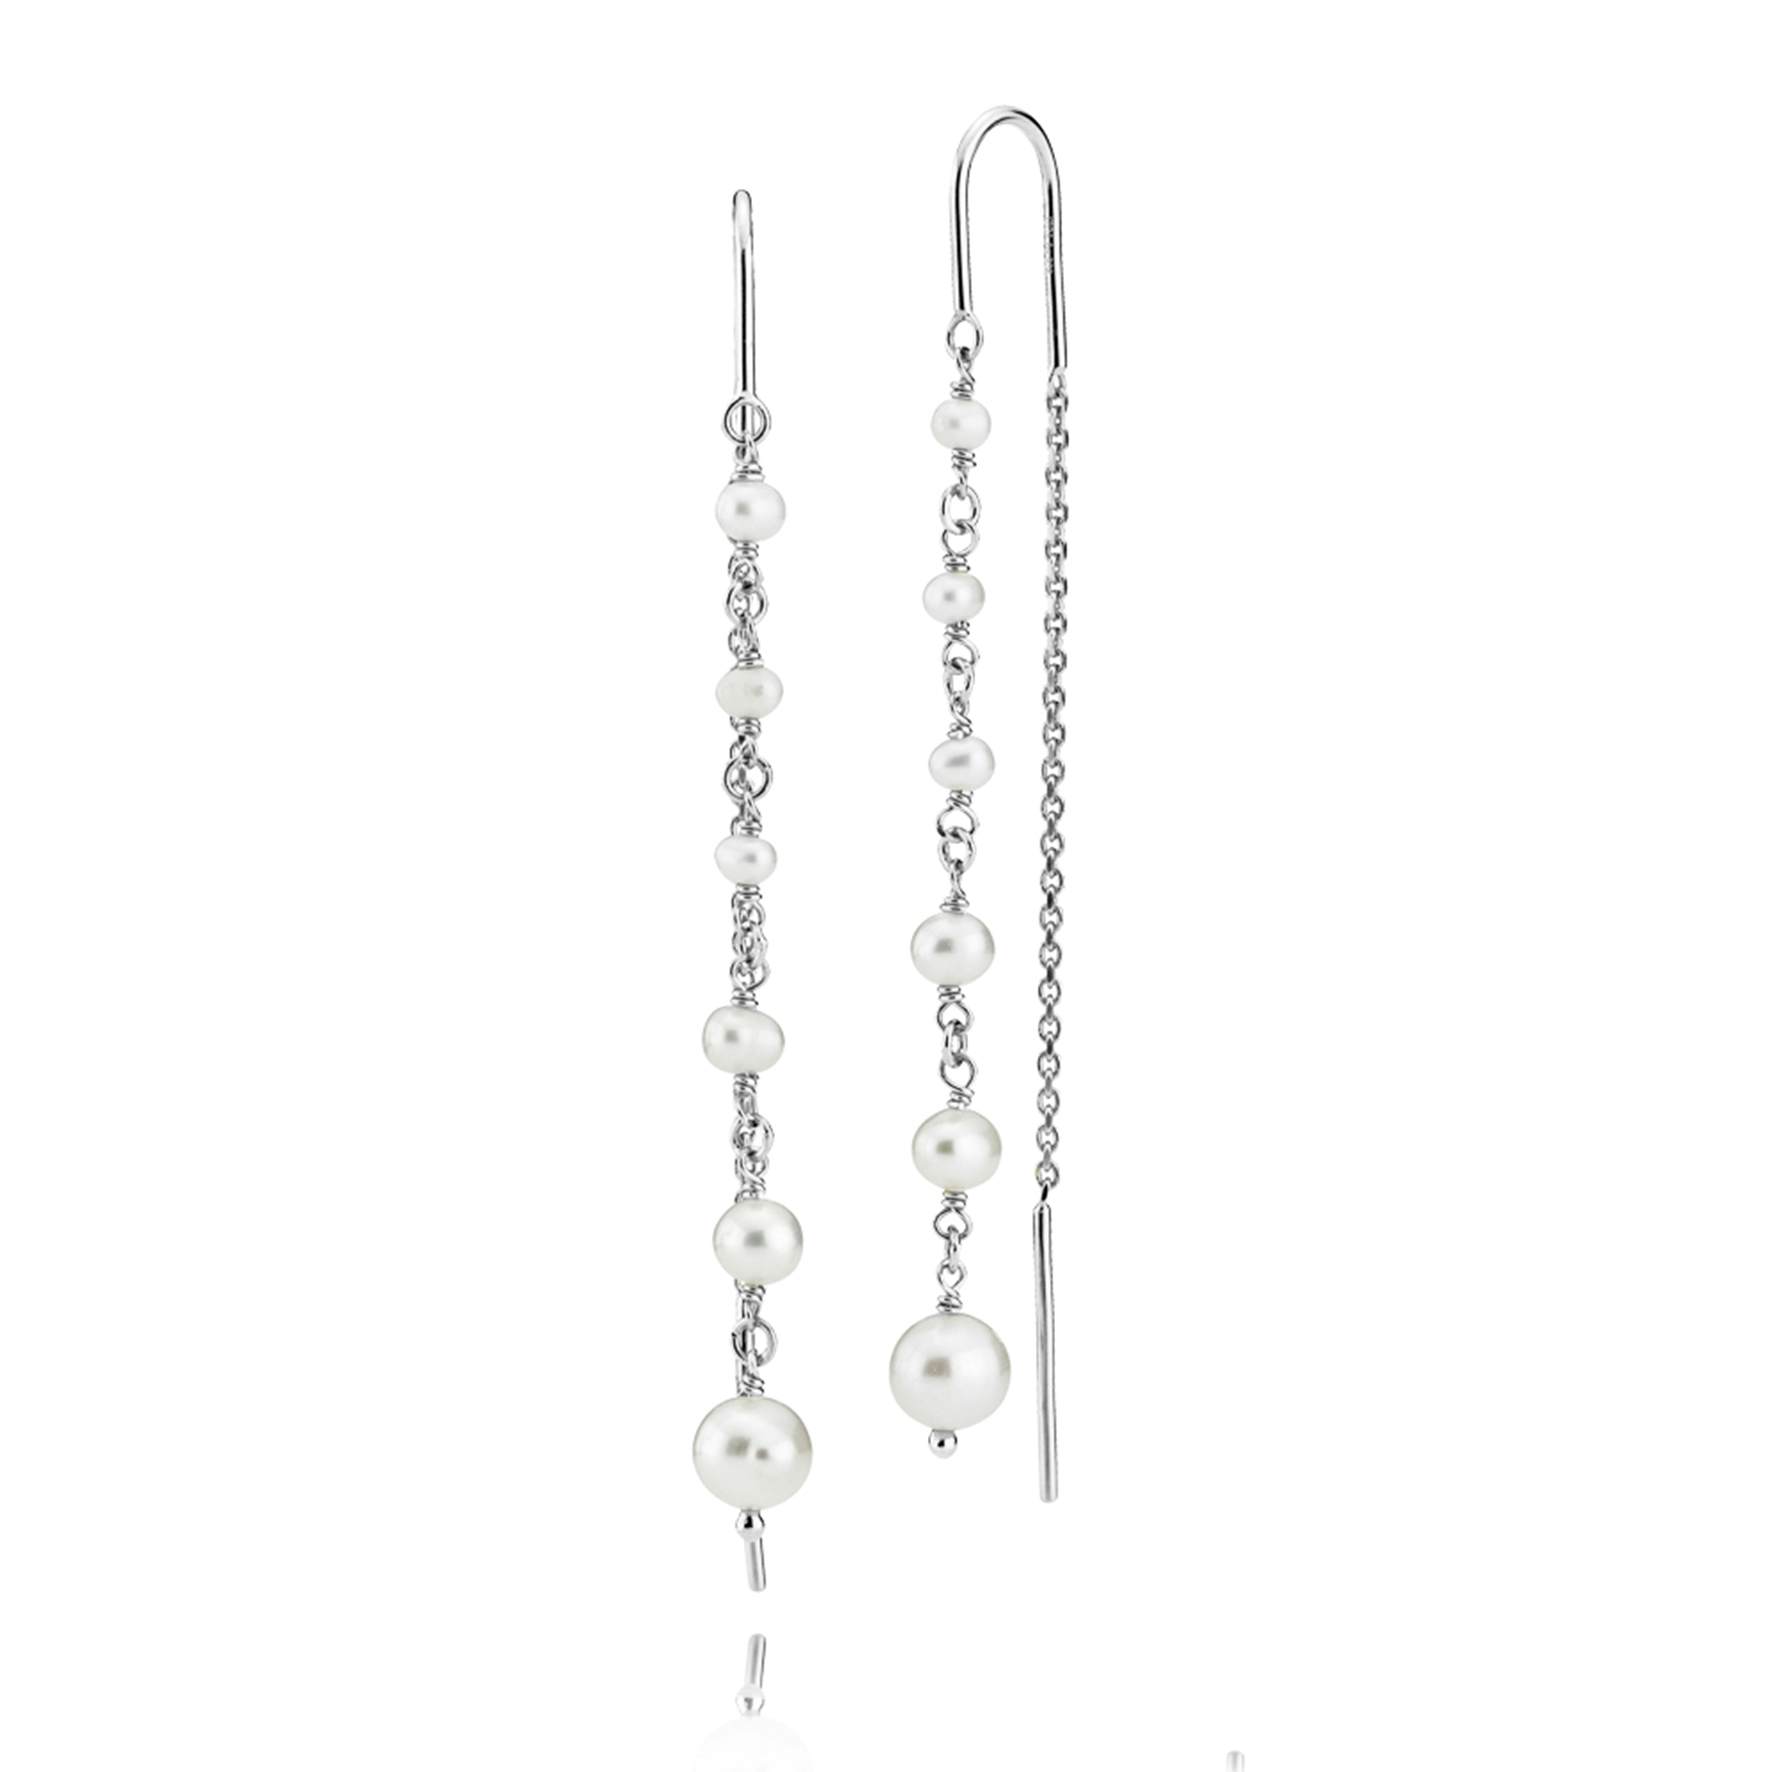 Paradise Earchains Freshwater Pearls von Izabel Camille in Silber Sterling 925|Freshwater Pearl